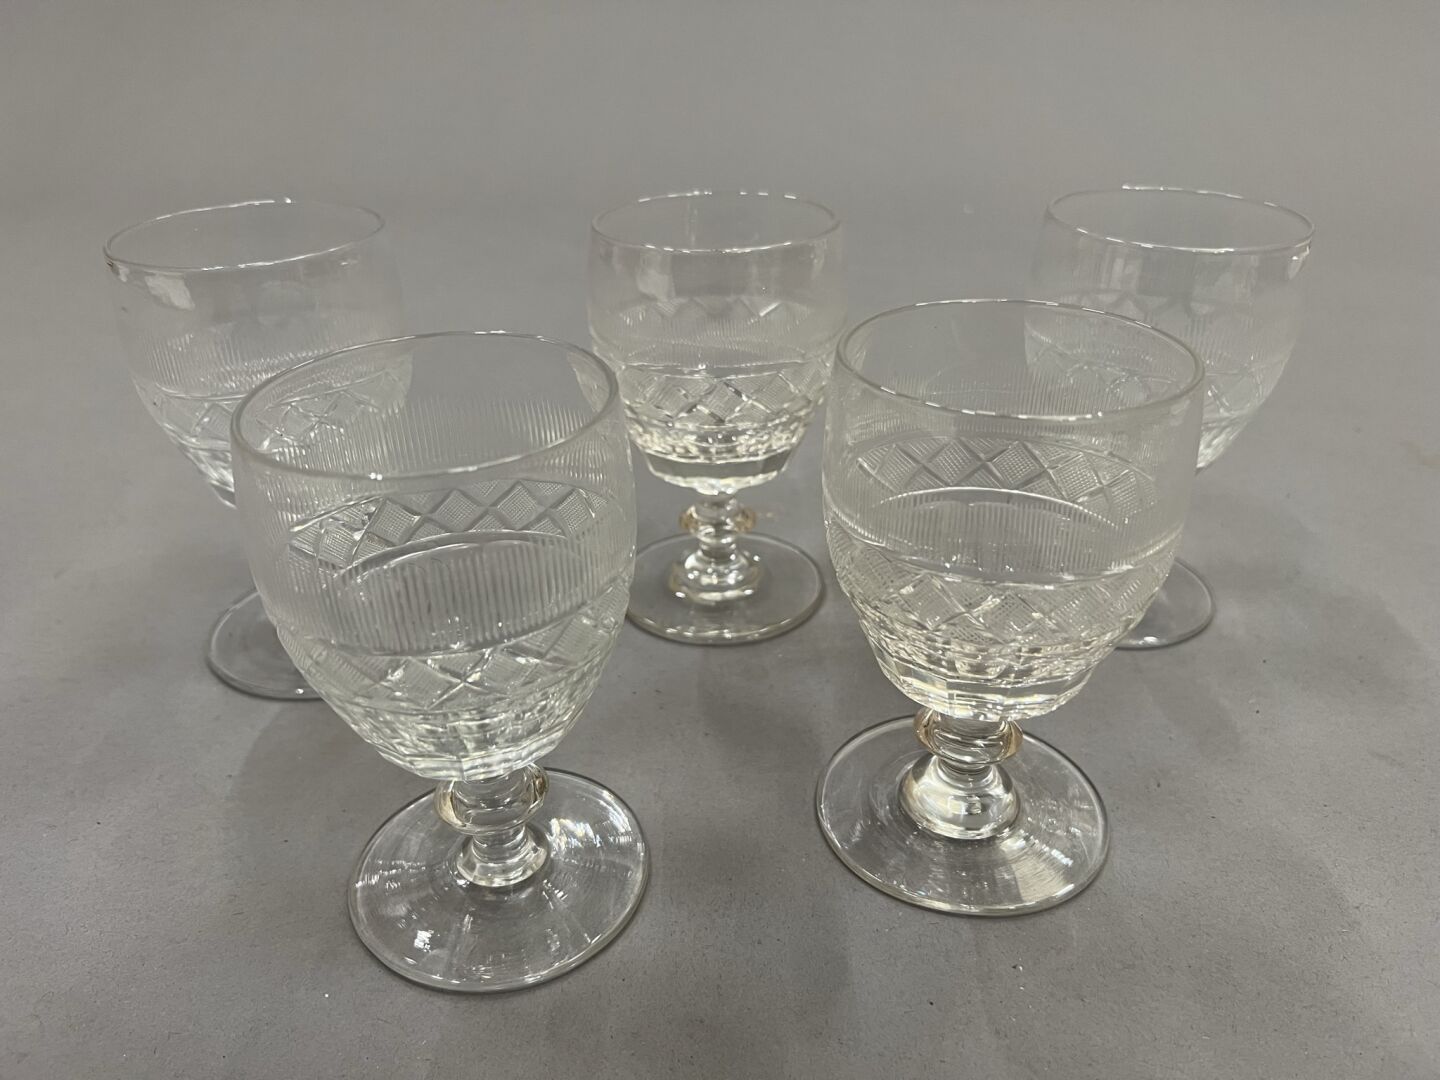 Null Set of 5 cut crystal water glasses, Baccarat ?
H.14 cm